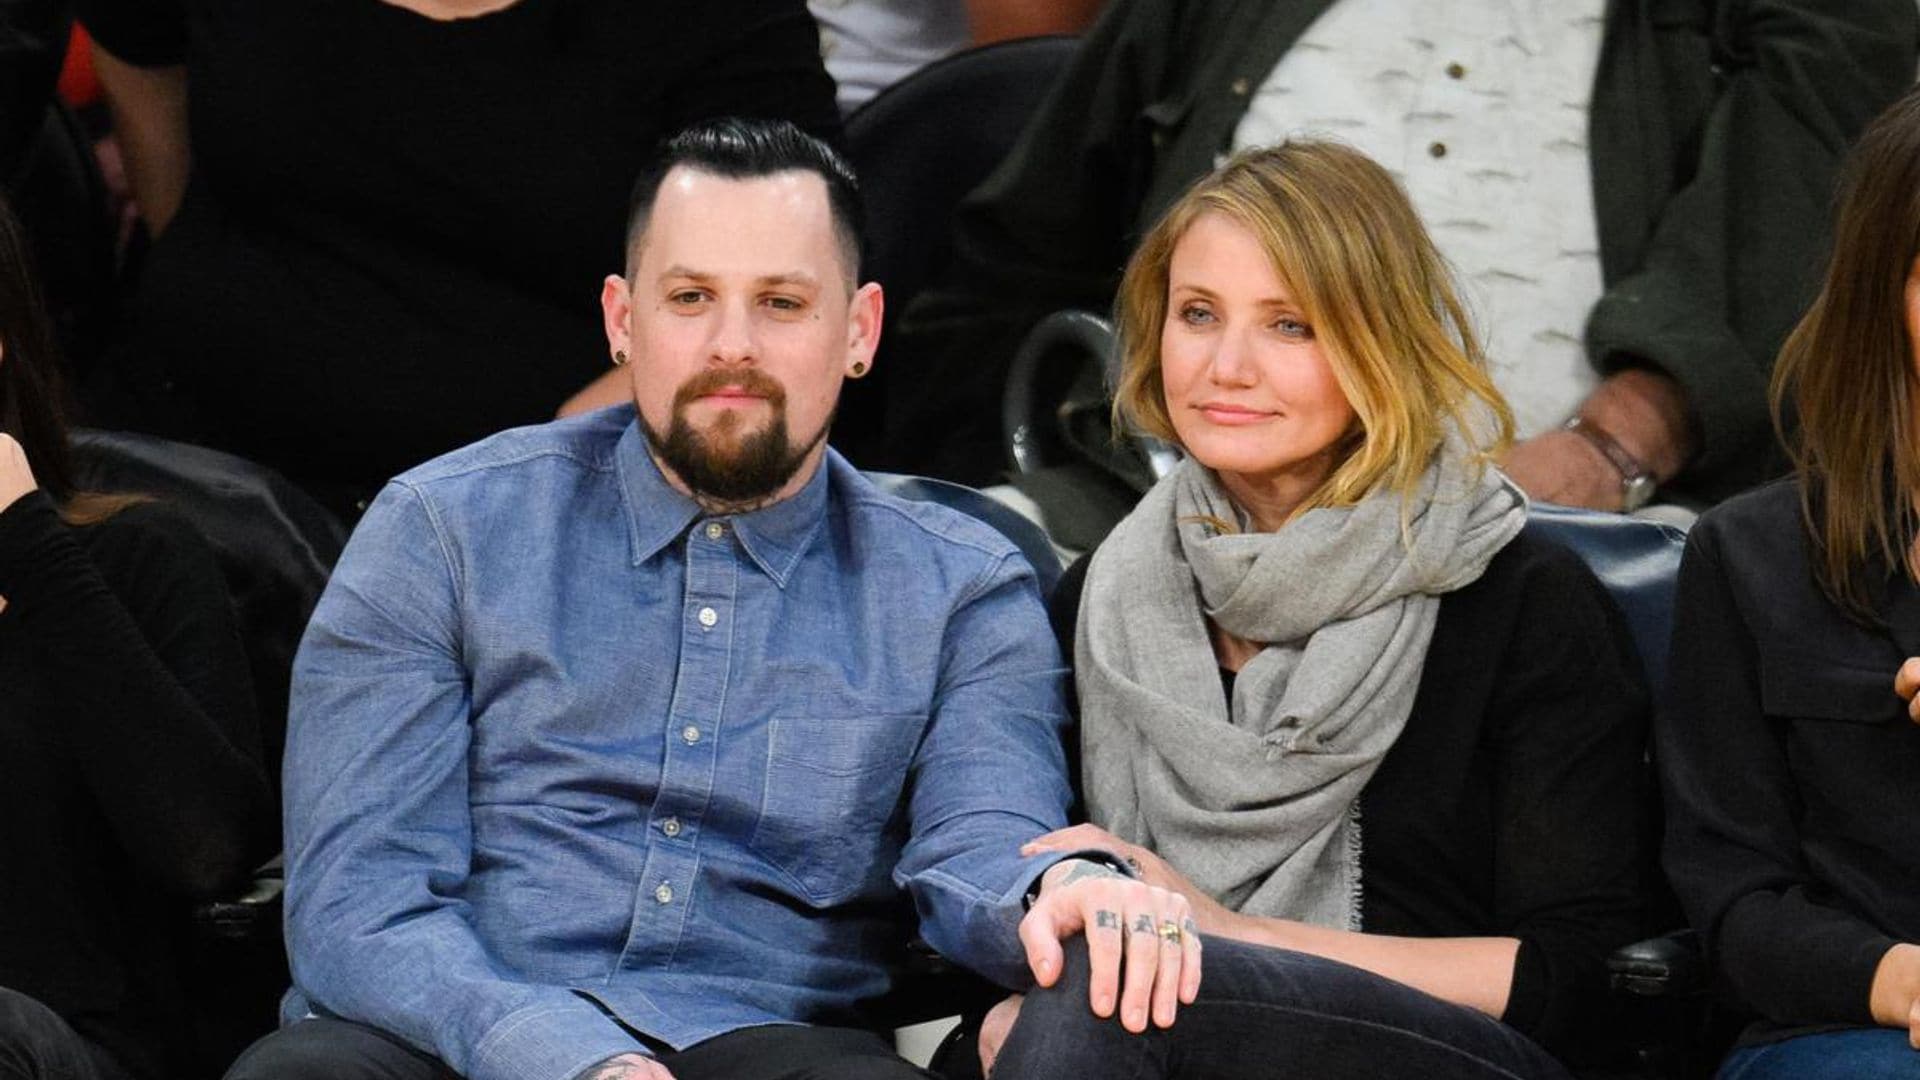 Cameron Diaz and Benji Madden welcome a second baby into their family